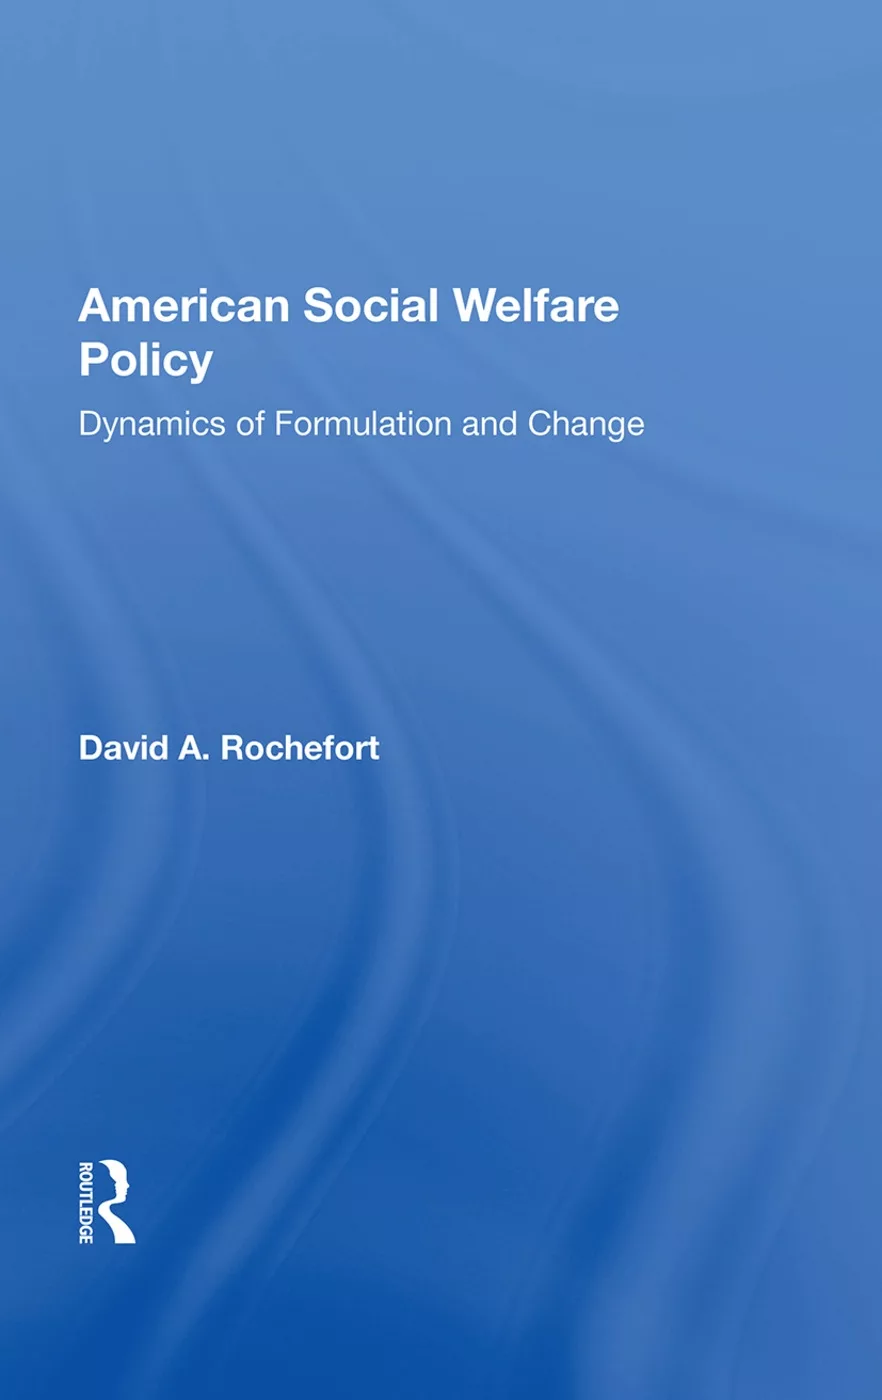 American Social Welfare Policy: Dynamics of Formulation and Change